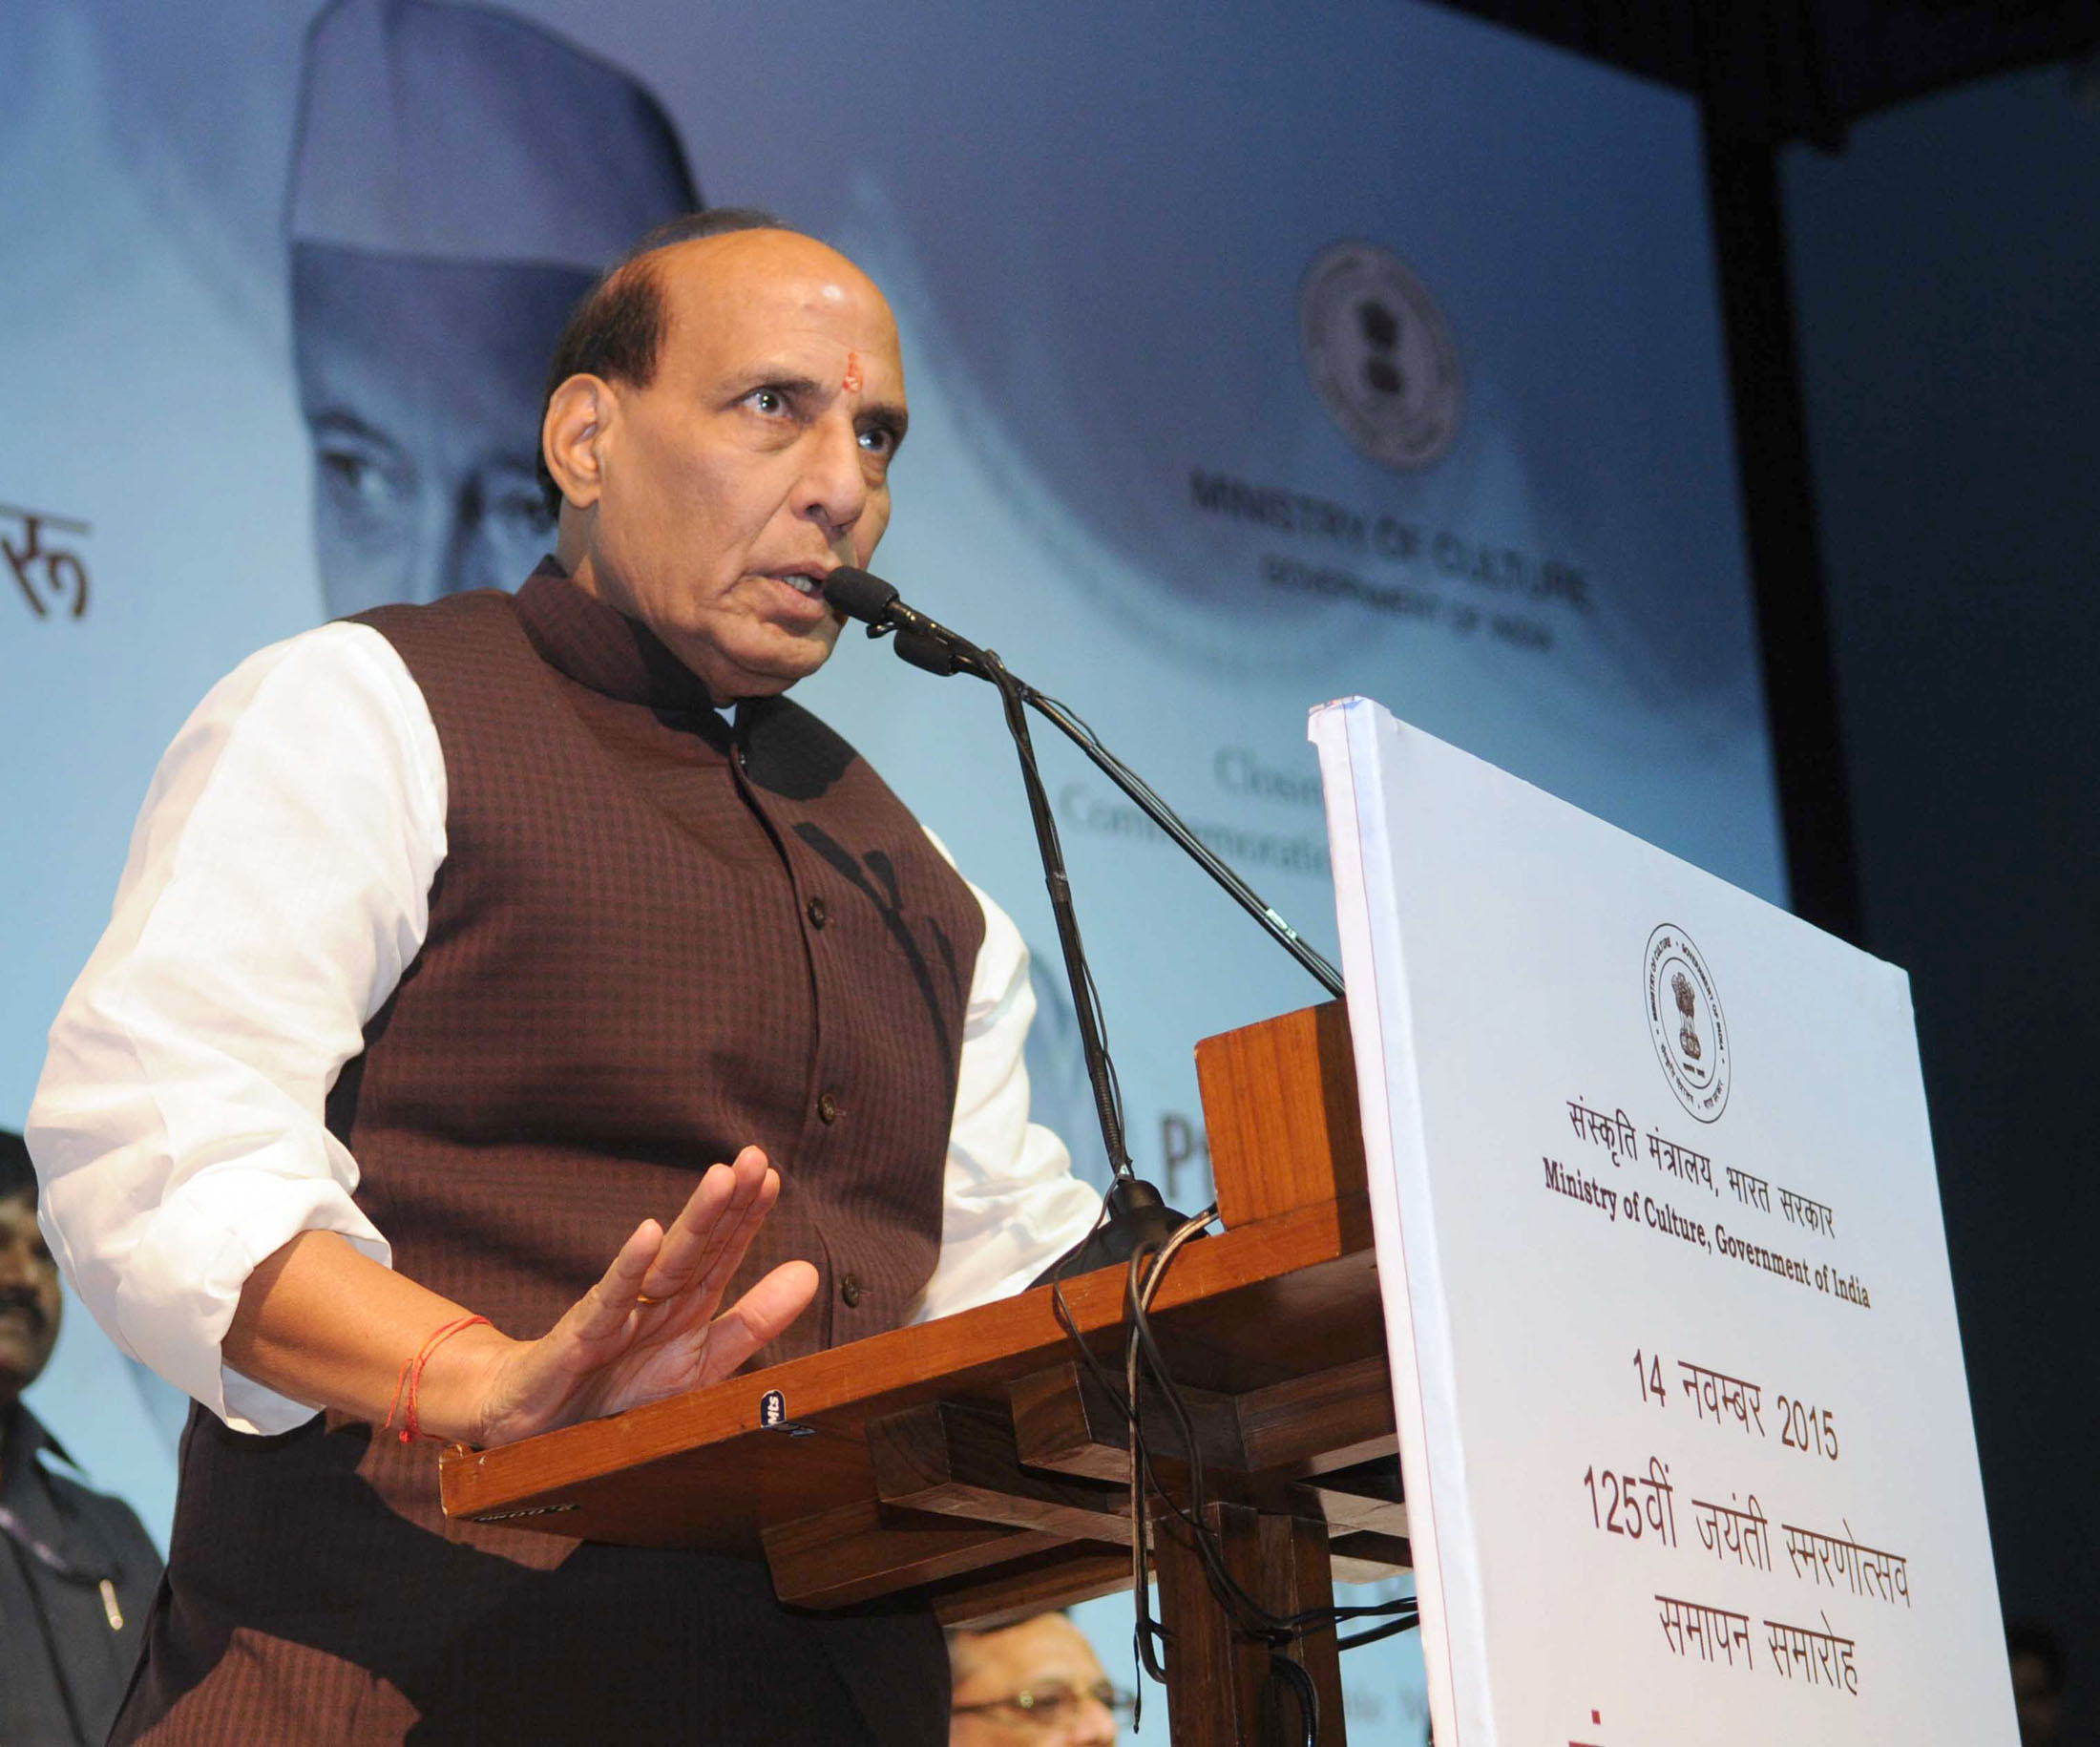 The Union Home Minister, Shri Rajnath Singh  addressing at the function to commemorate the closing ceremony of 125th Birth Anniversary of the former Prime Minister, Pandit Jawaharlal Nehru, in New Delhi on November 14, 2015.